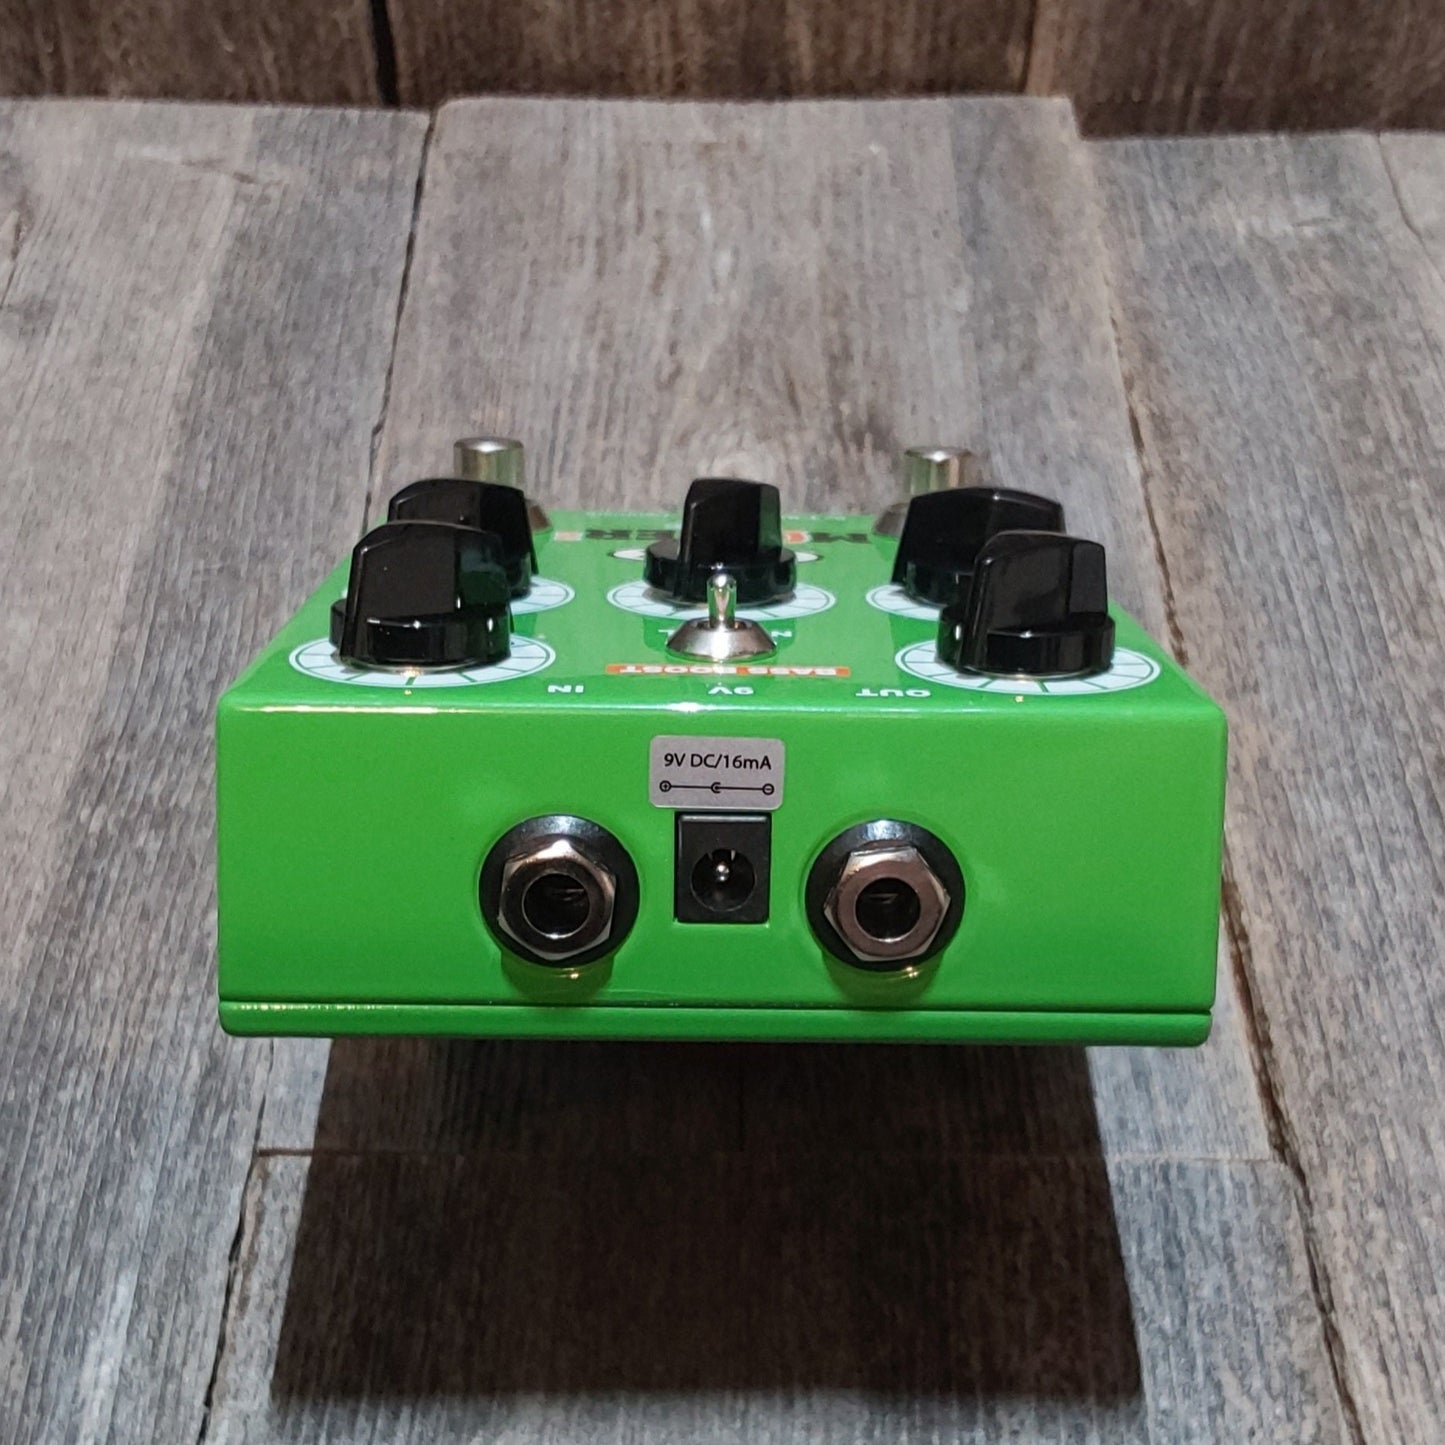 T-Rex Moller 2 Overdrive Pedal with Clean Boost